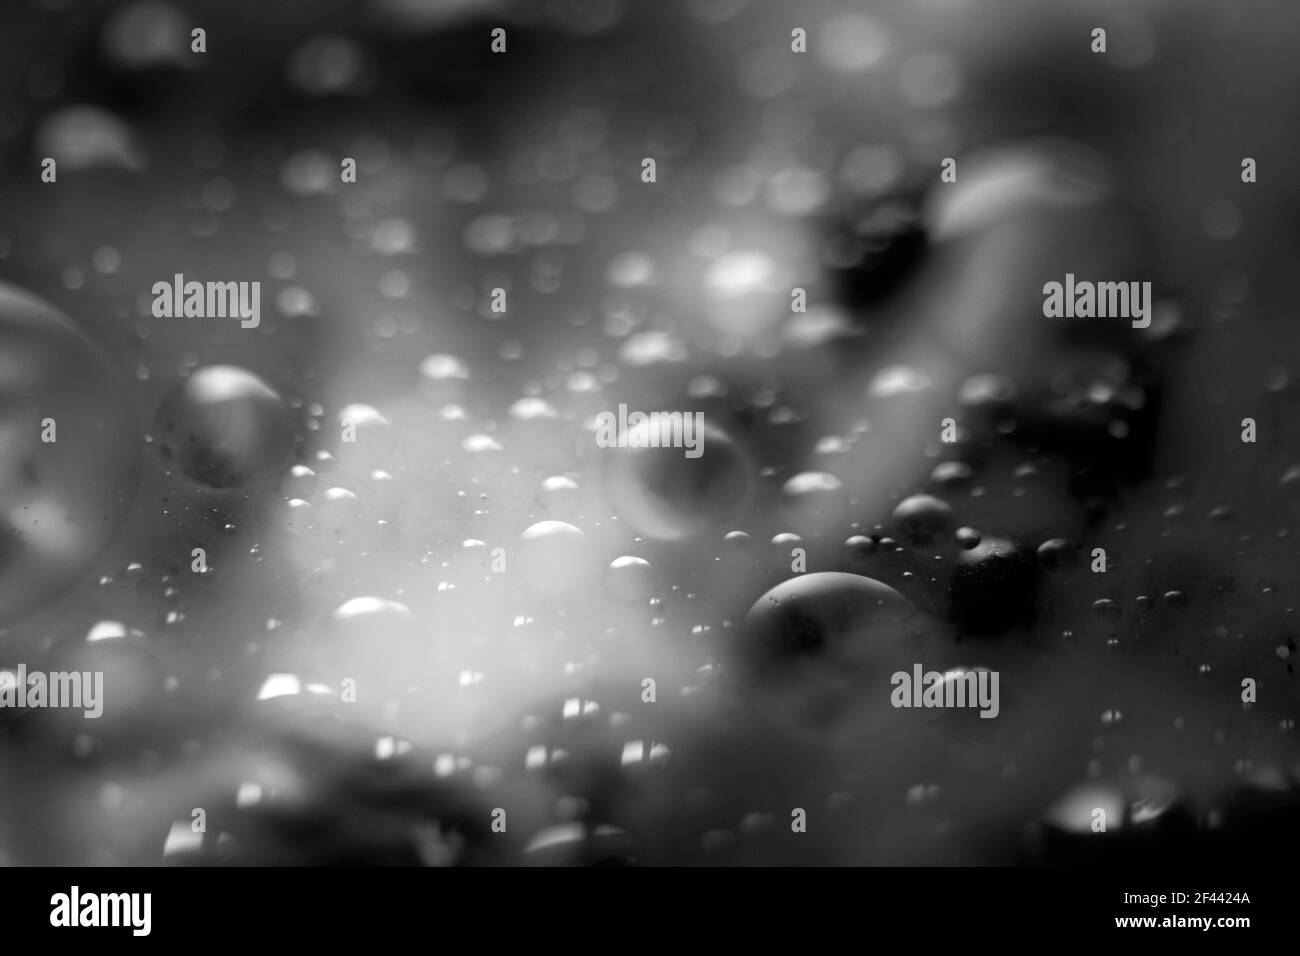 Black and white abstract background, bubbles rising up in a liquid substance. Blurred background Stock Photo